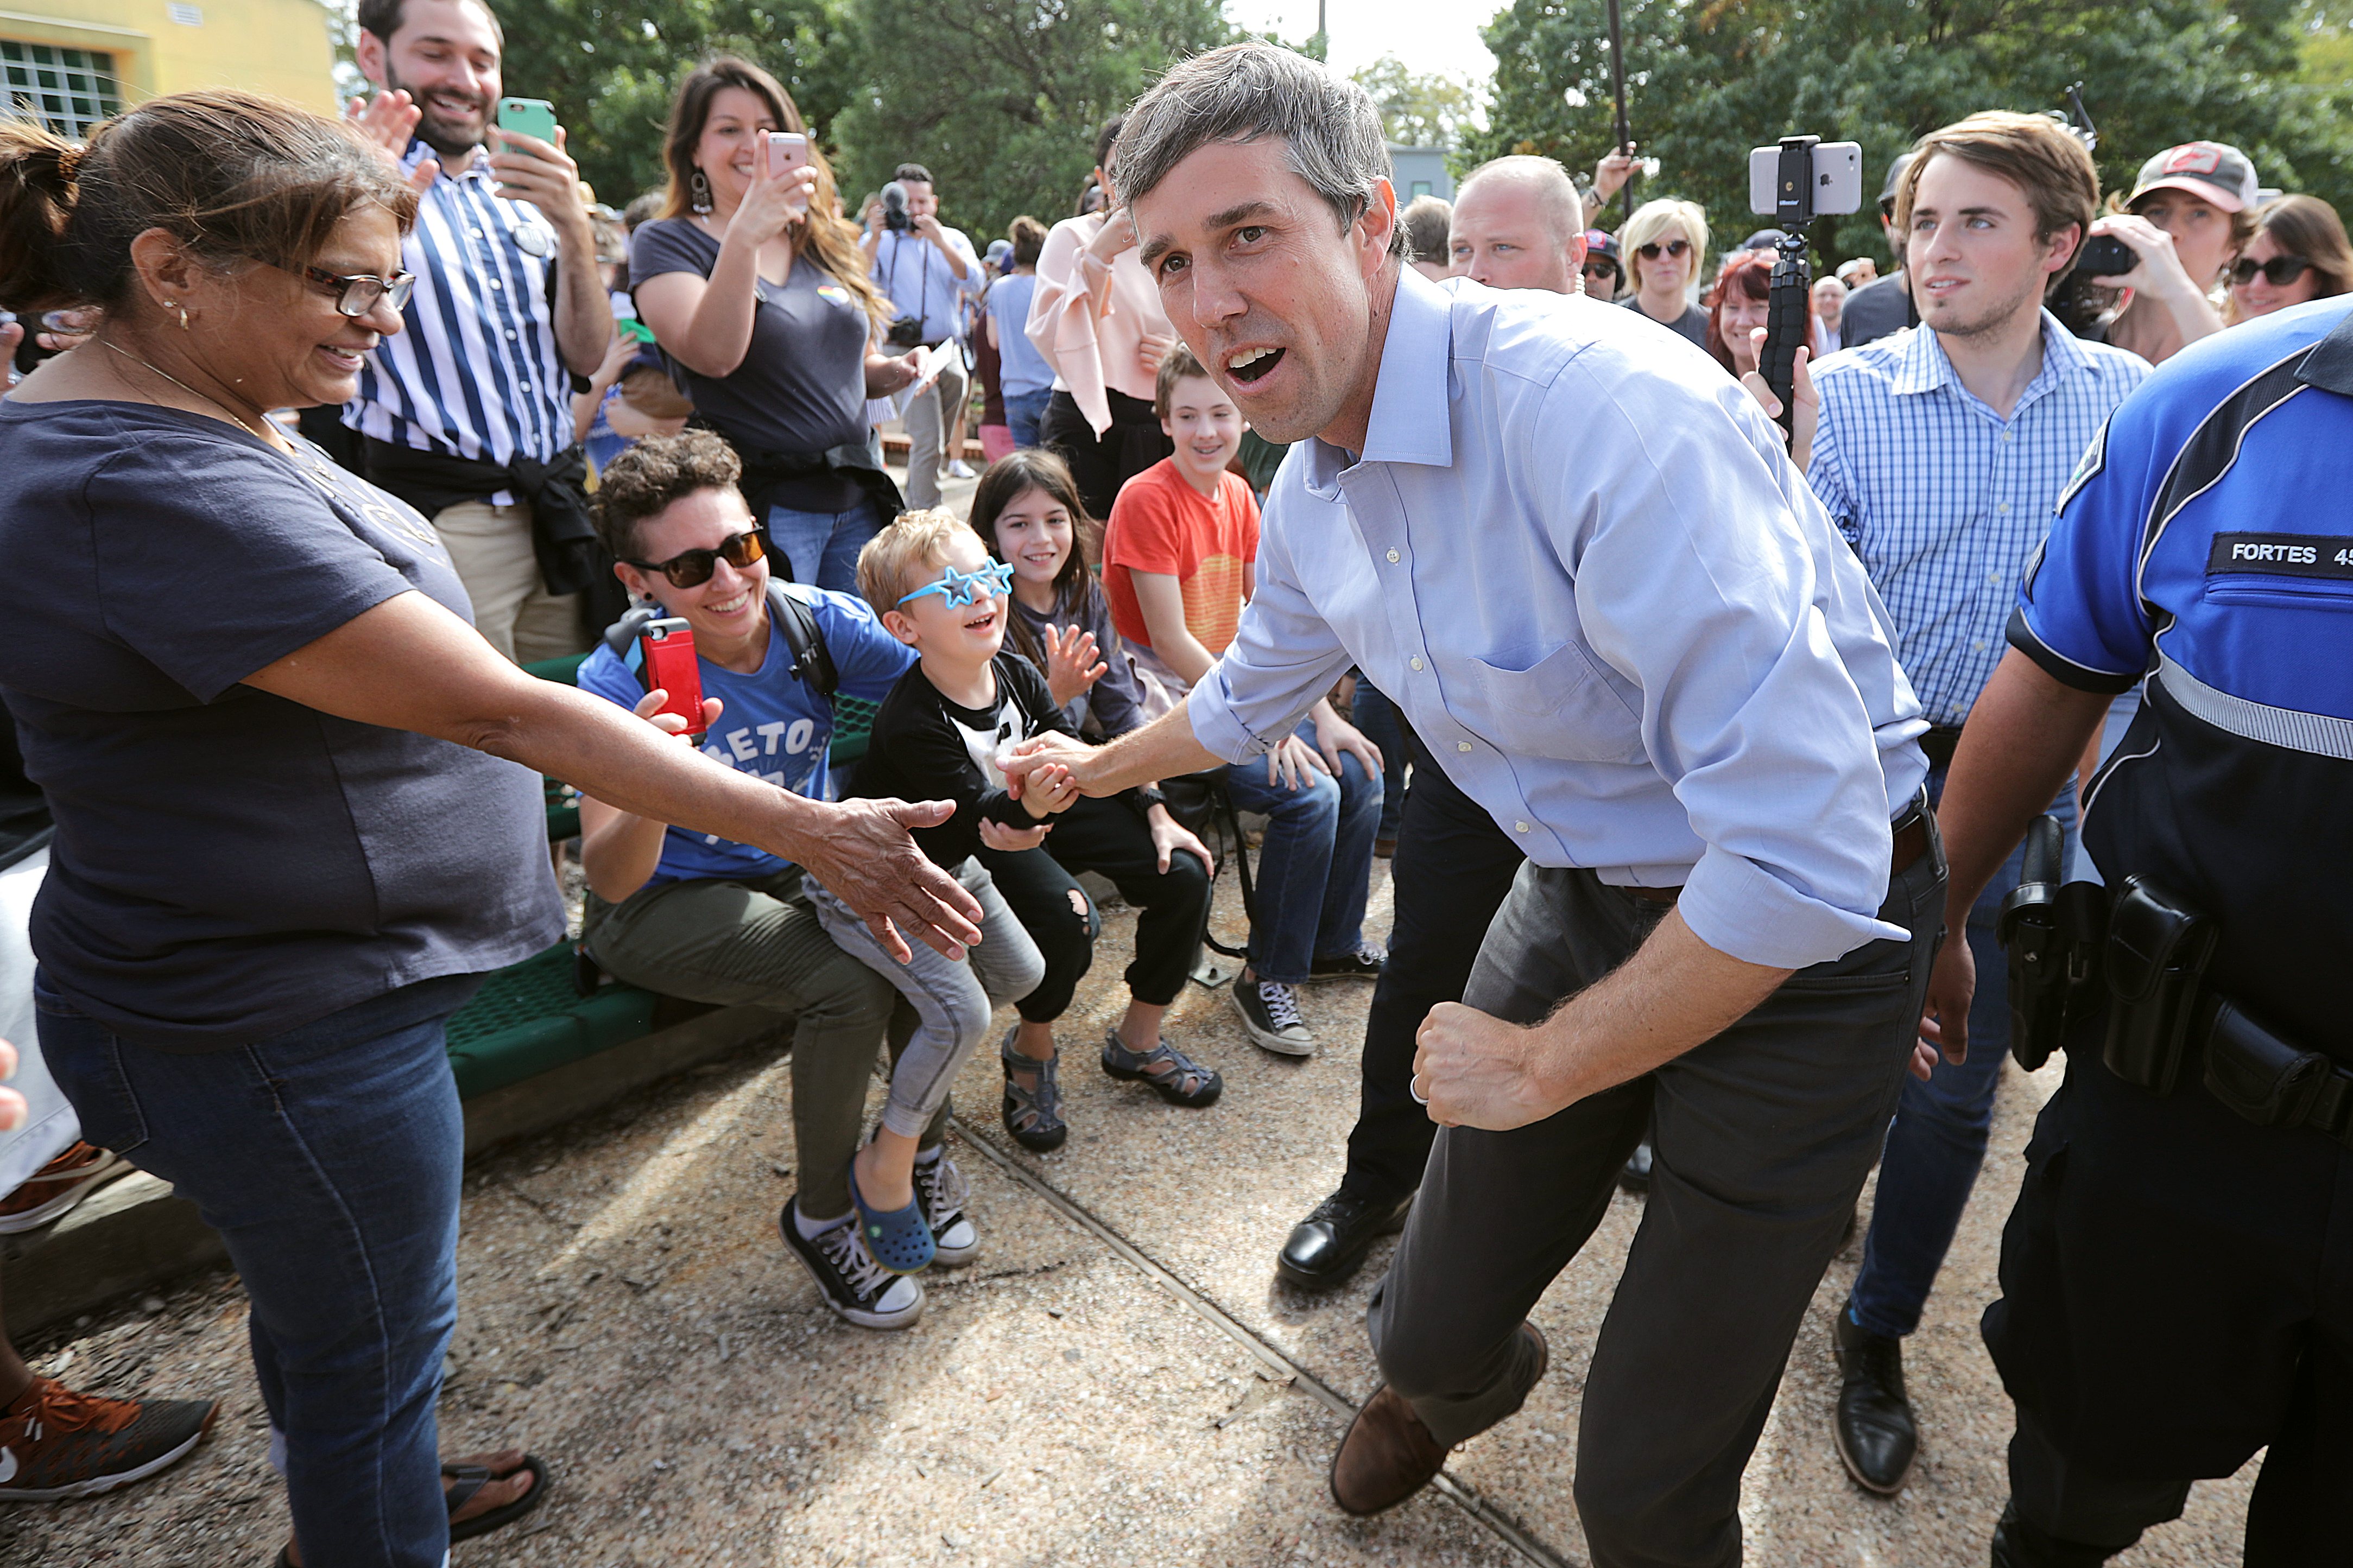 Senate candidate Rep. Beto O'Rourke greets supporters as he arrives for a campaign rally in Austin, Texas. (Chip Somodevilla/Getty Images)